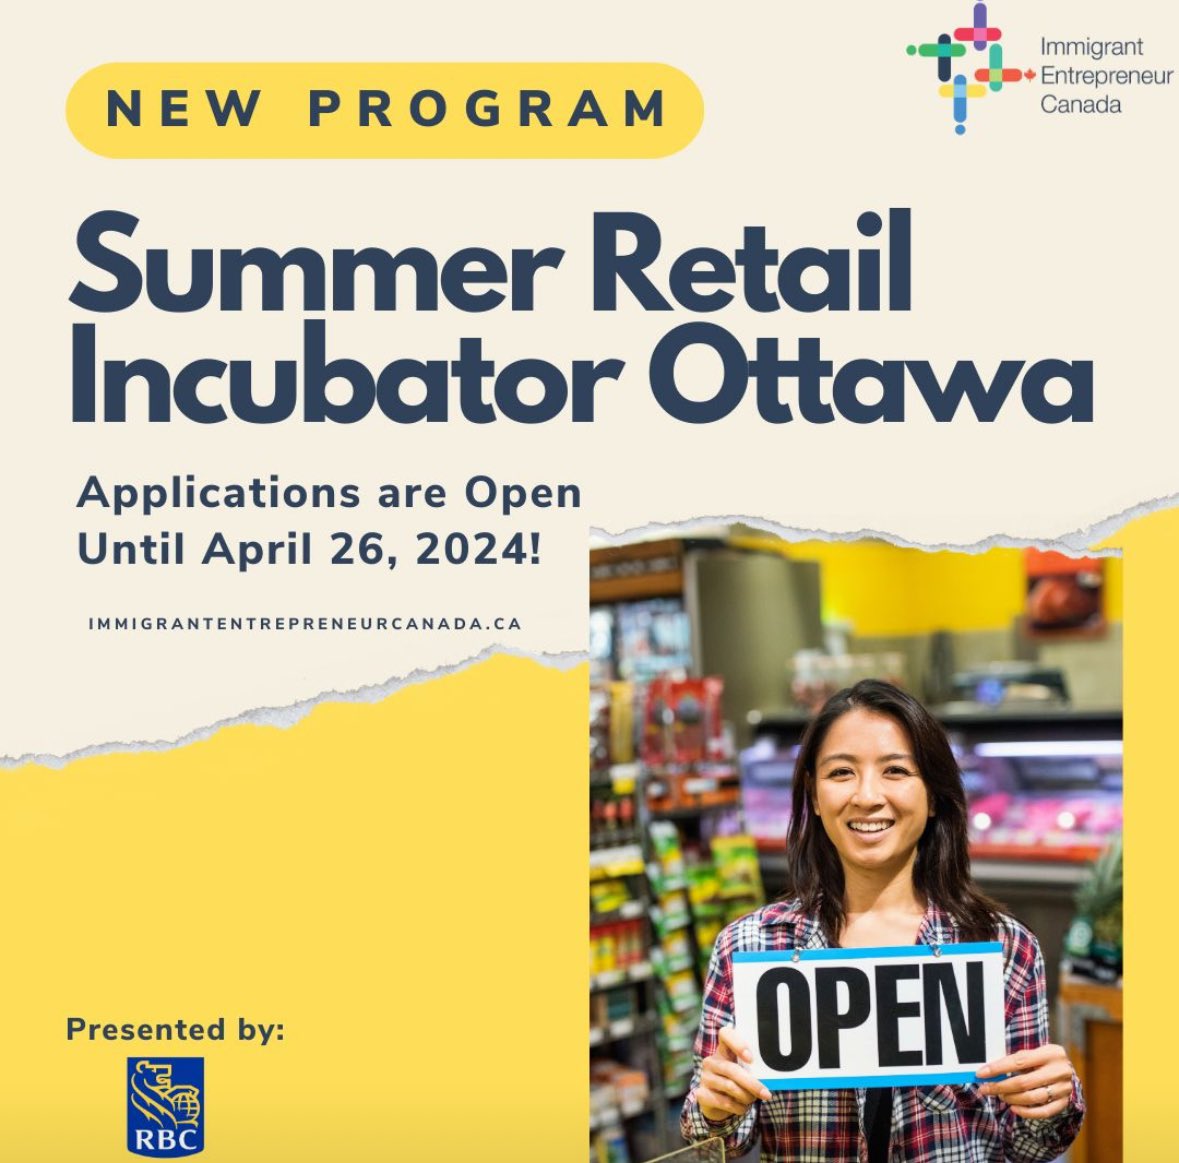 Thrilled to announce the launch of Immigrant Entrepreneur Canada’s first program! We will take 20 Ottawa immigrant entrepreneurs and incubate/accelerate their businesses. Working with partners like @RBC @Re4mOttawa @ByWardMarket_ and @Invest_Ottawa to make this a reality. #ottawa